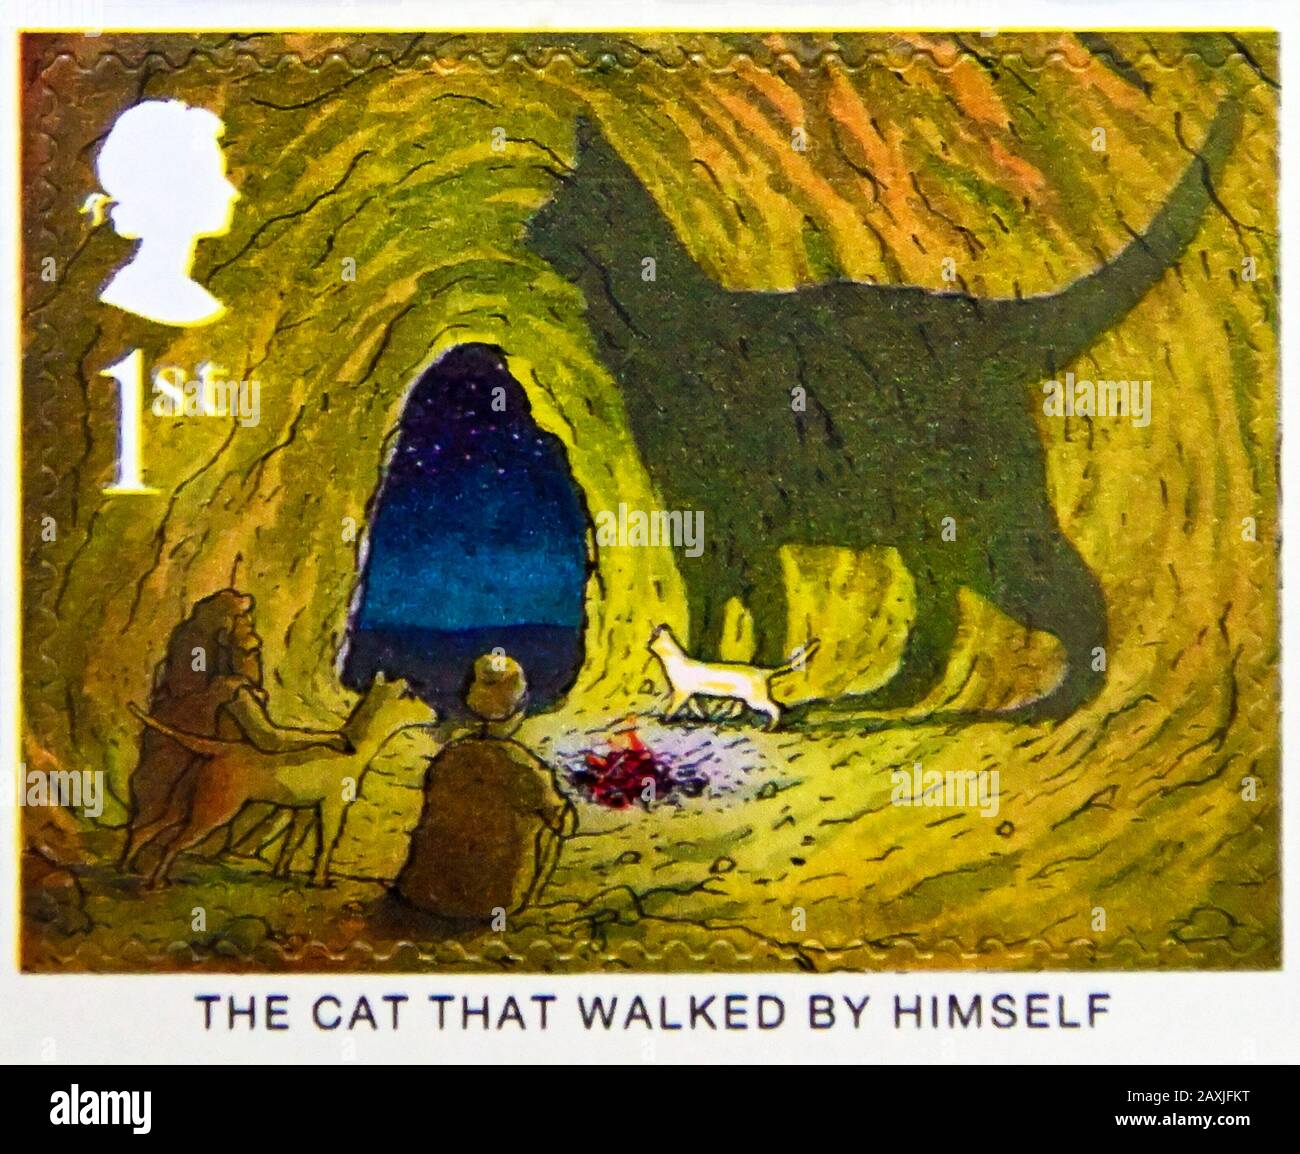 Postage stamp. Great Britain. Queen Elizabeth II. Centenary of Publication  of Rudyard Kipling's Just So Stories. 'The Cat that walked by Himself'. 1st  Stock Photo - Alamy